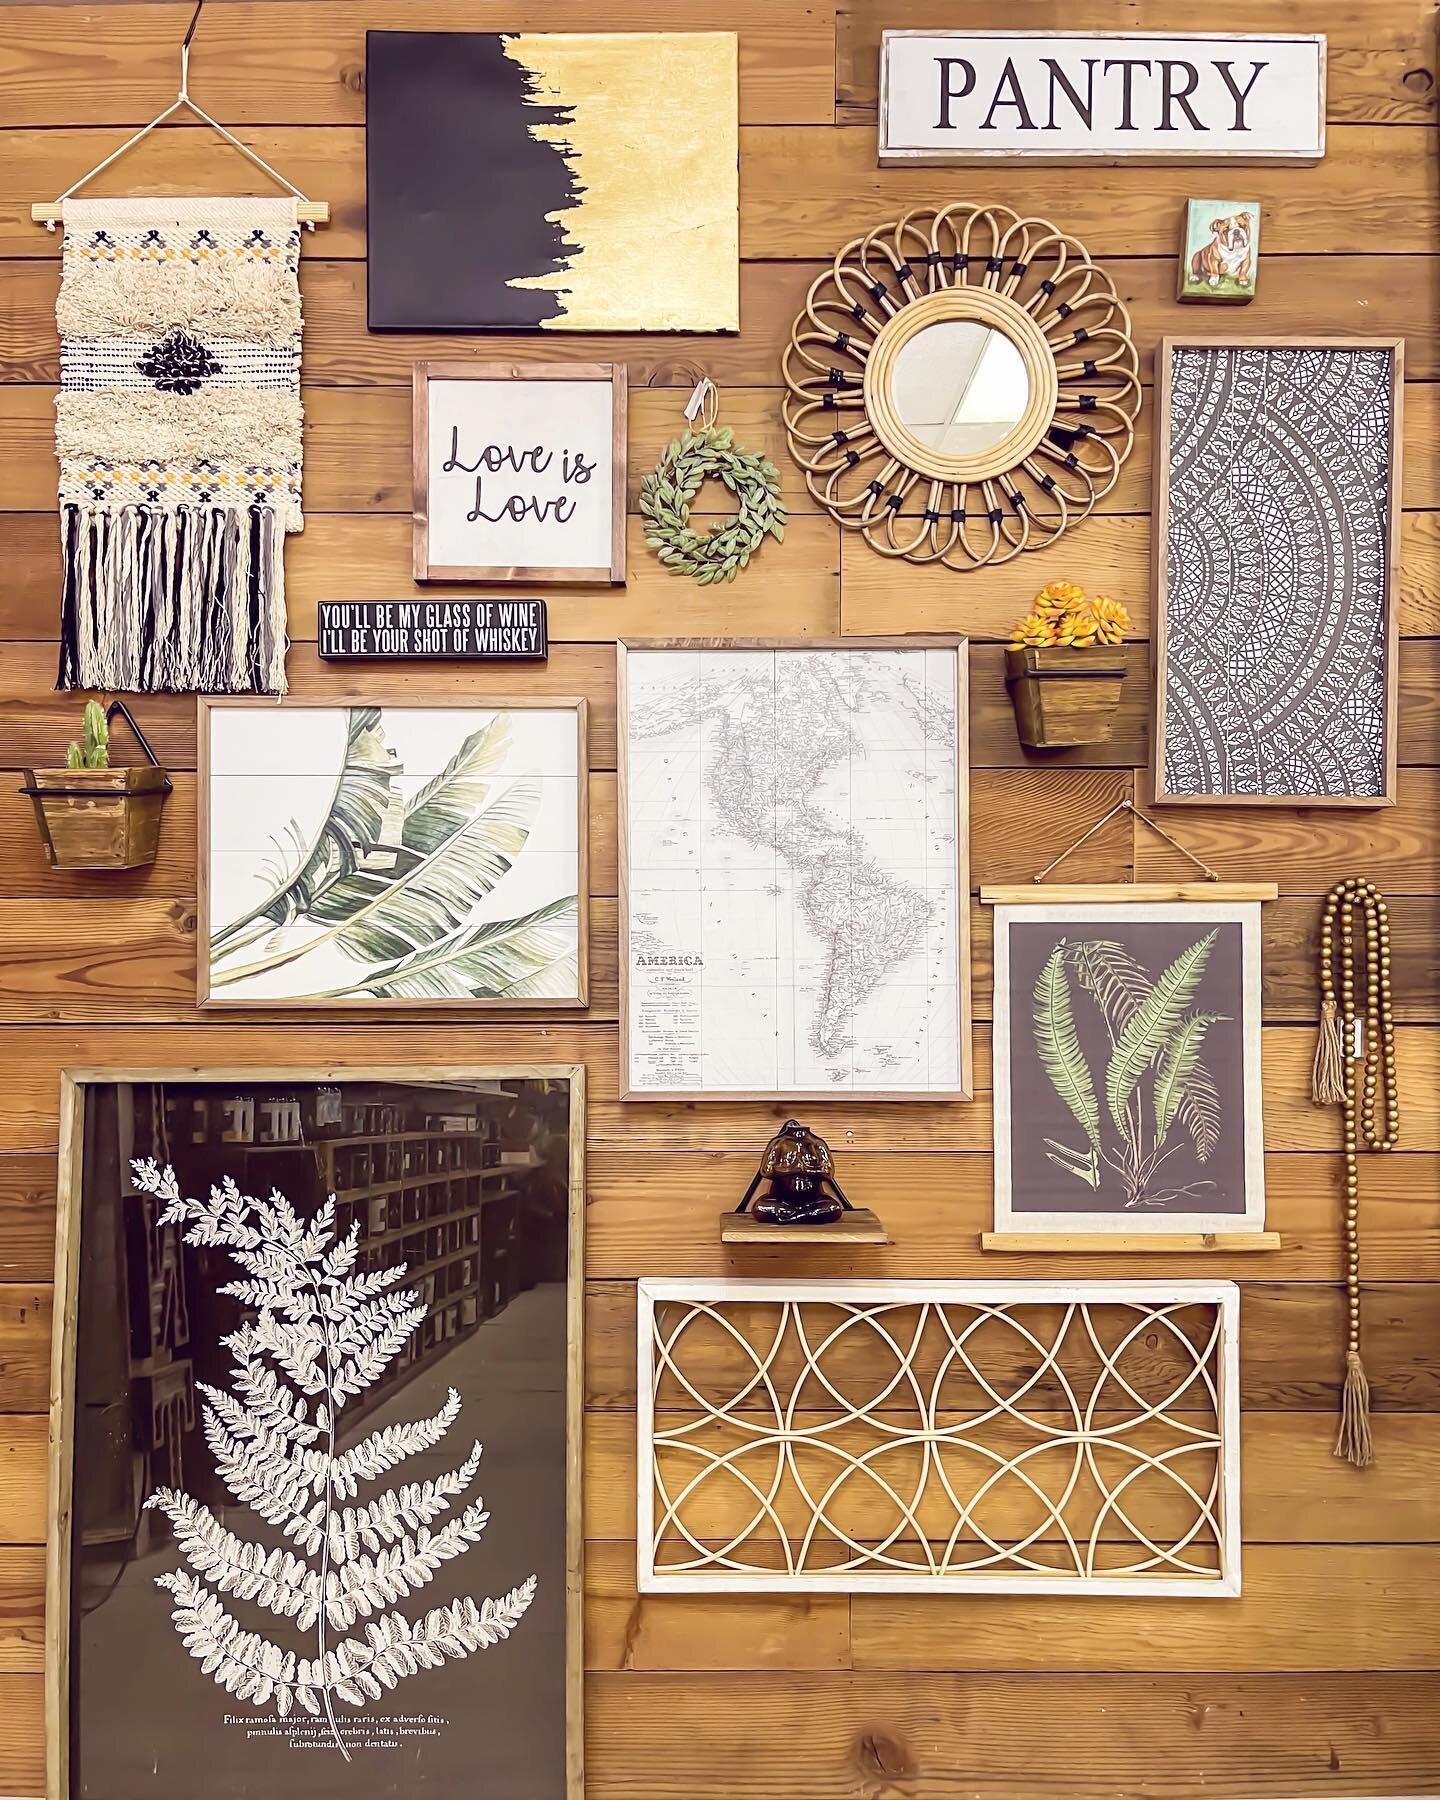 Big or small&hellip; we&rsquo;ve got something for every wall! We mixed it up to include a little bit of each decor style and honestly&hellip;? We&rsquo;re obsessed! Isn&rsquo;t it amazing how you can make things work together to create your own uniq